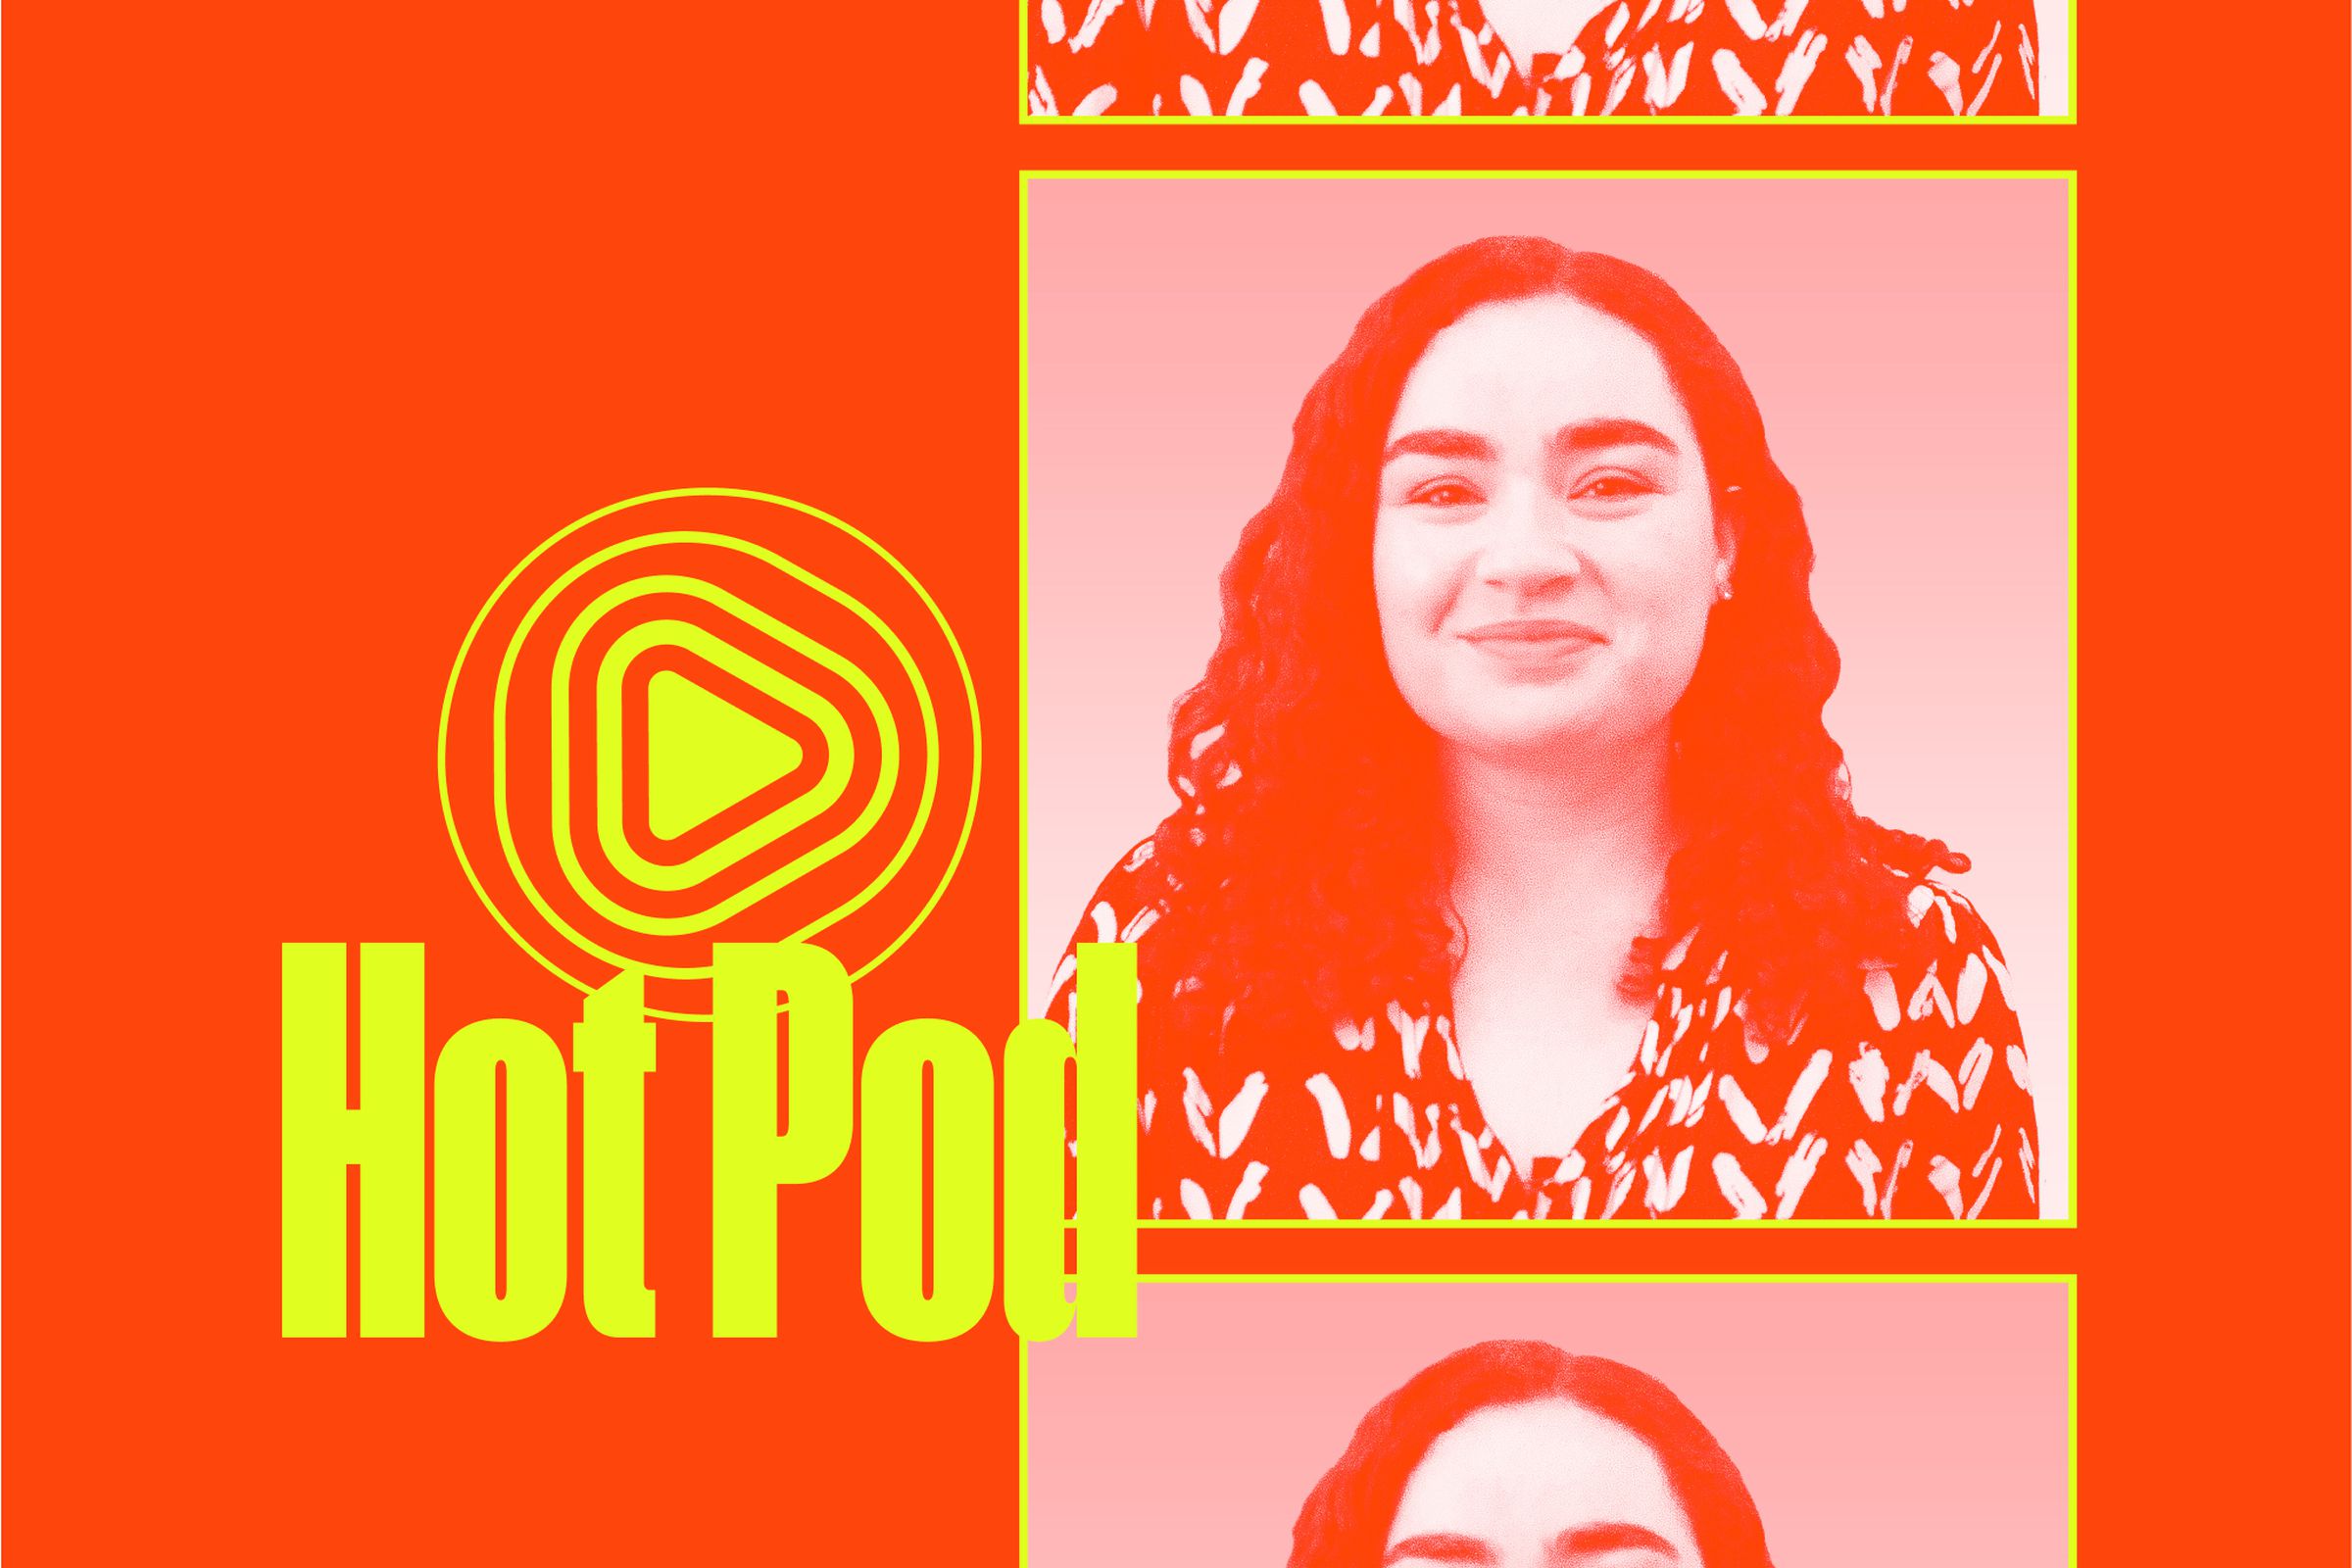 The Hot Pod logo in yellow is overlaid on a photo of Hot Pod lead writer Ariel Shapiro on an orange background. 